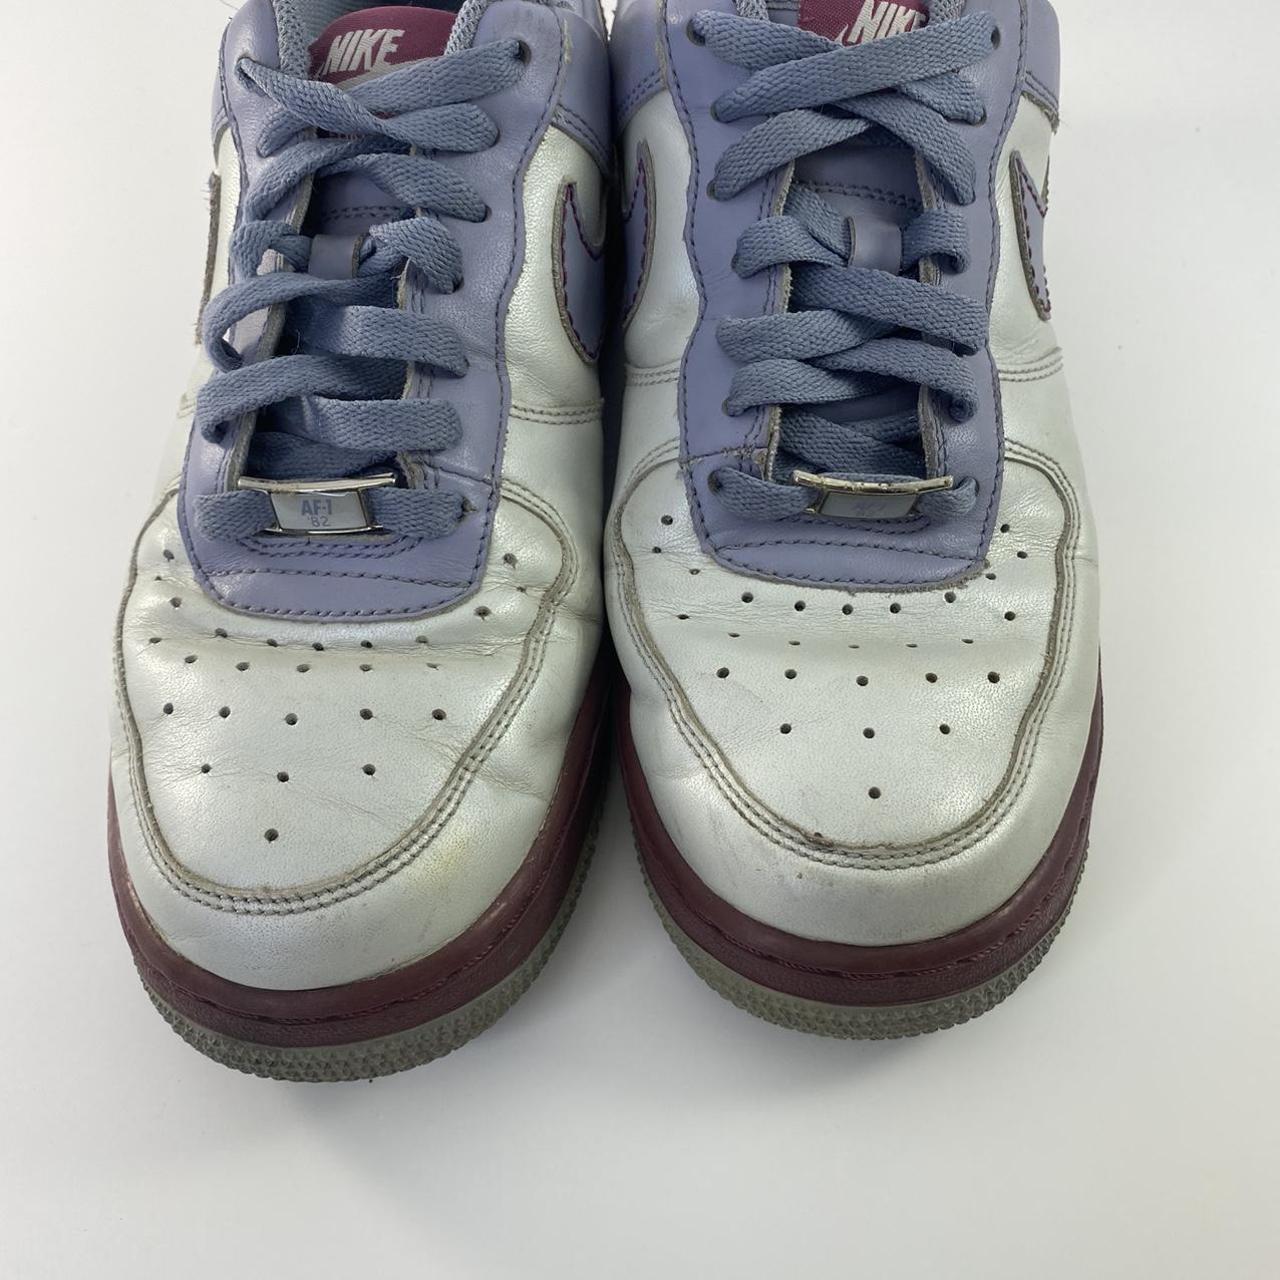 Nike Air Force 1 XXV AF-1 '82 Pebble Grey & Red/Maroon 315115-002 Size 8.5